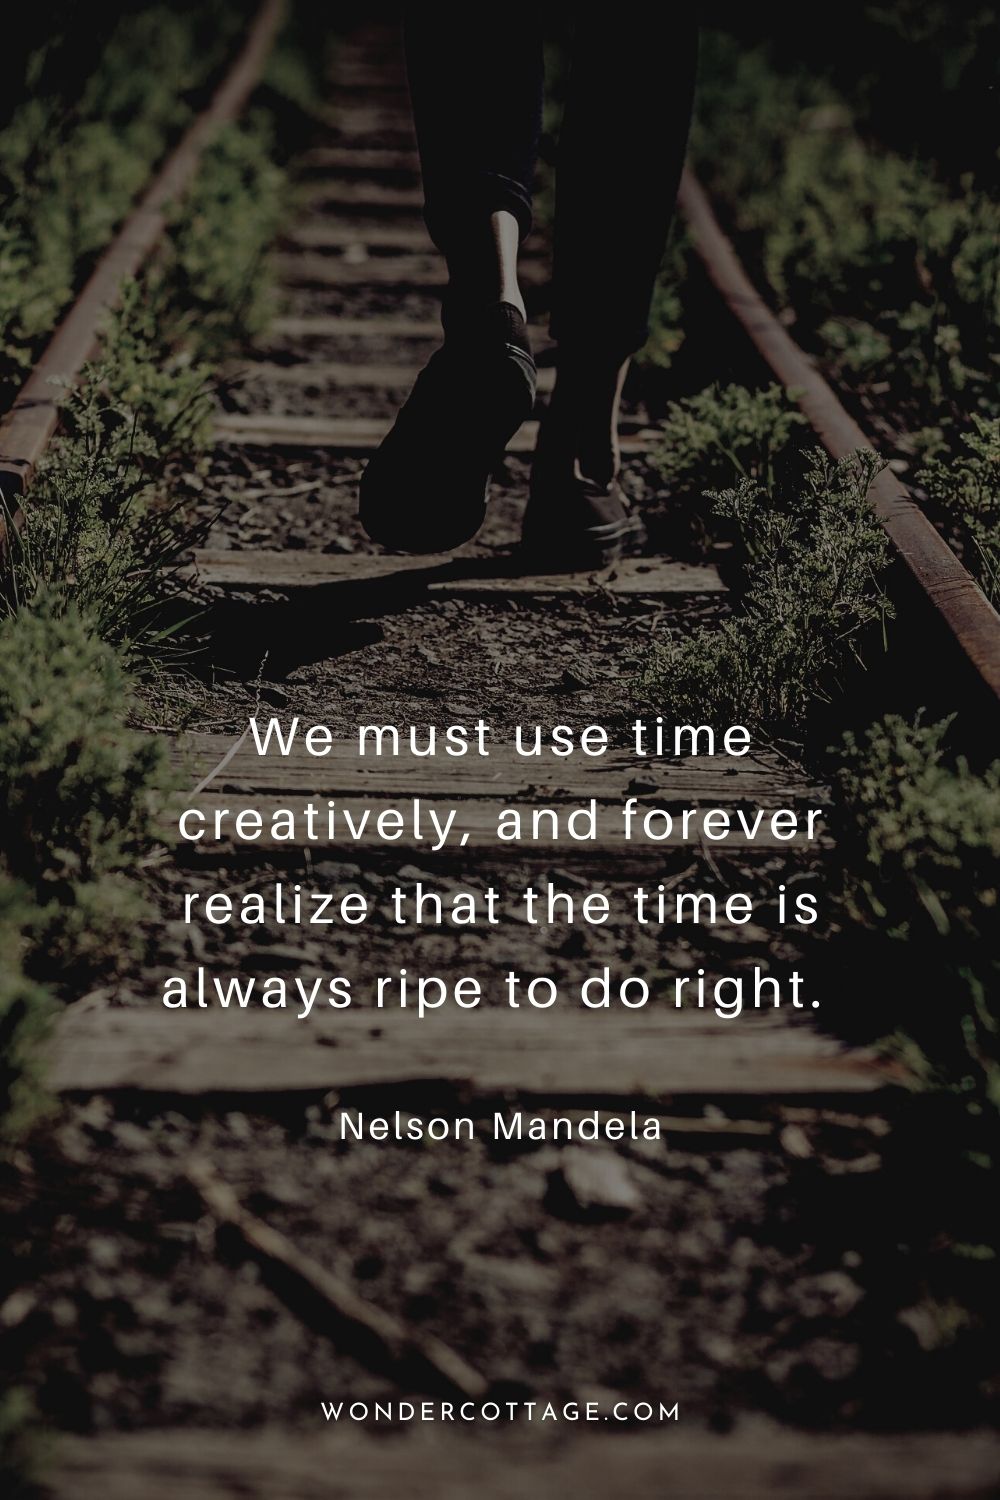 We must use time creatively, and forever realize that the time is always ripe to do right.  Nelson Mandela